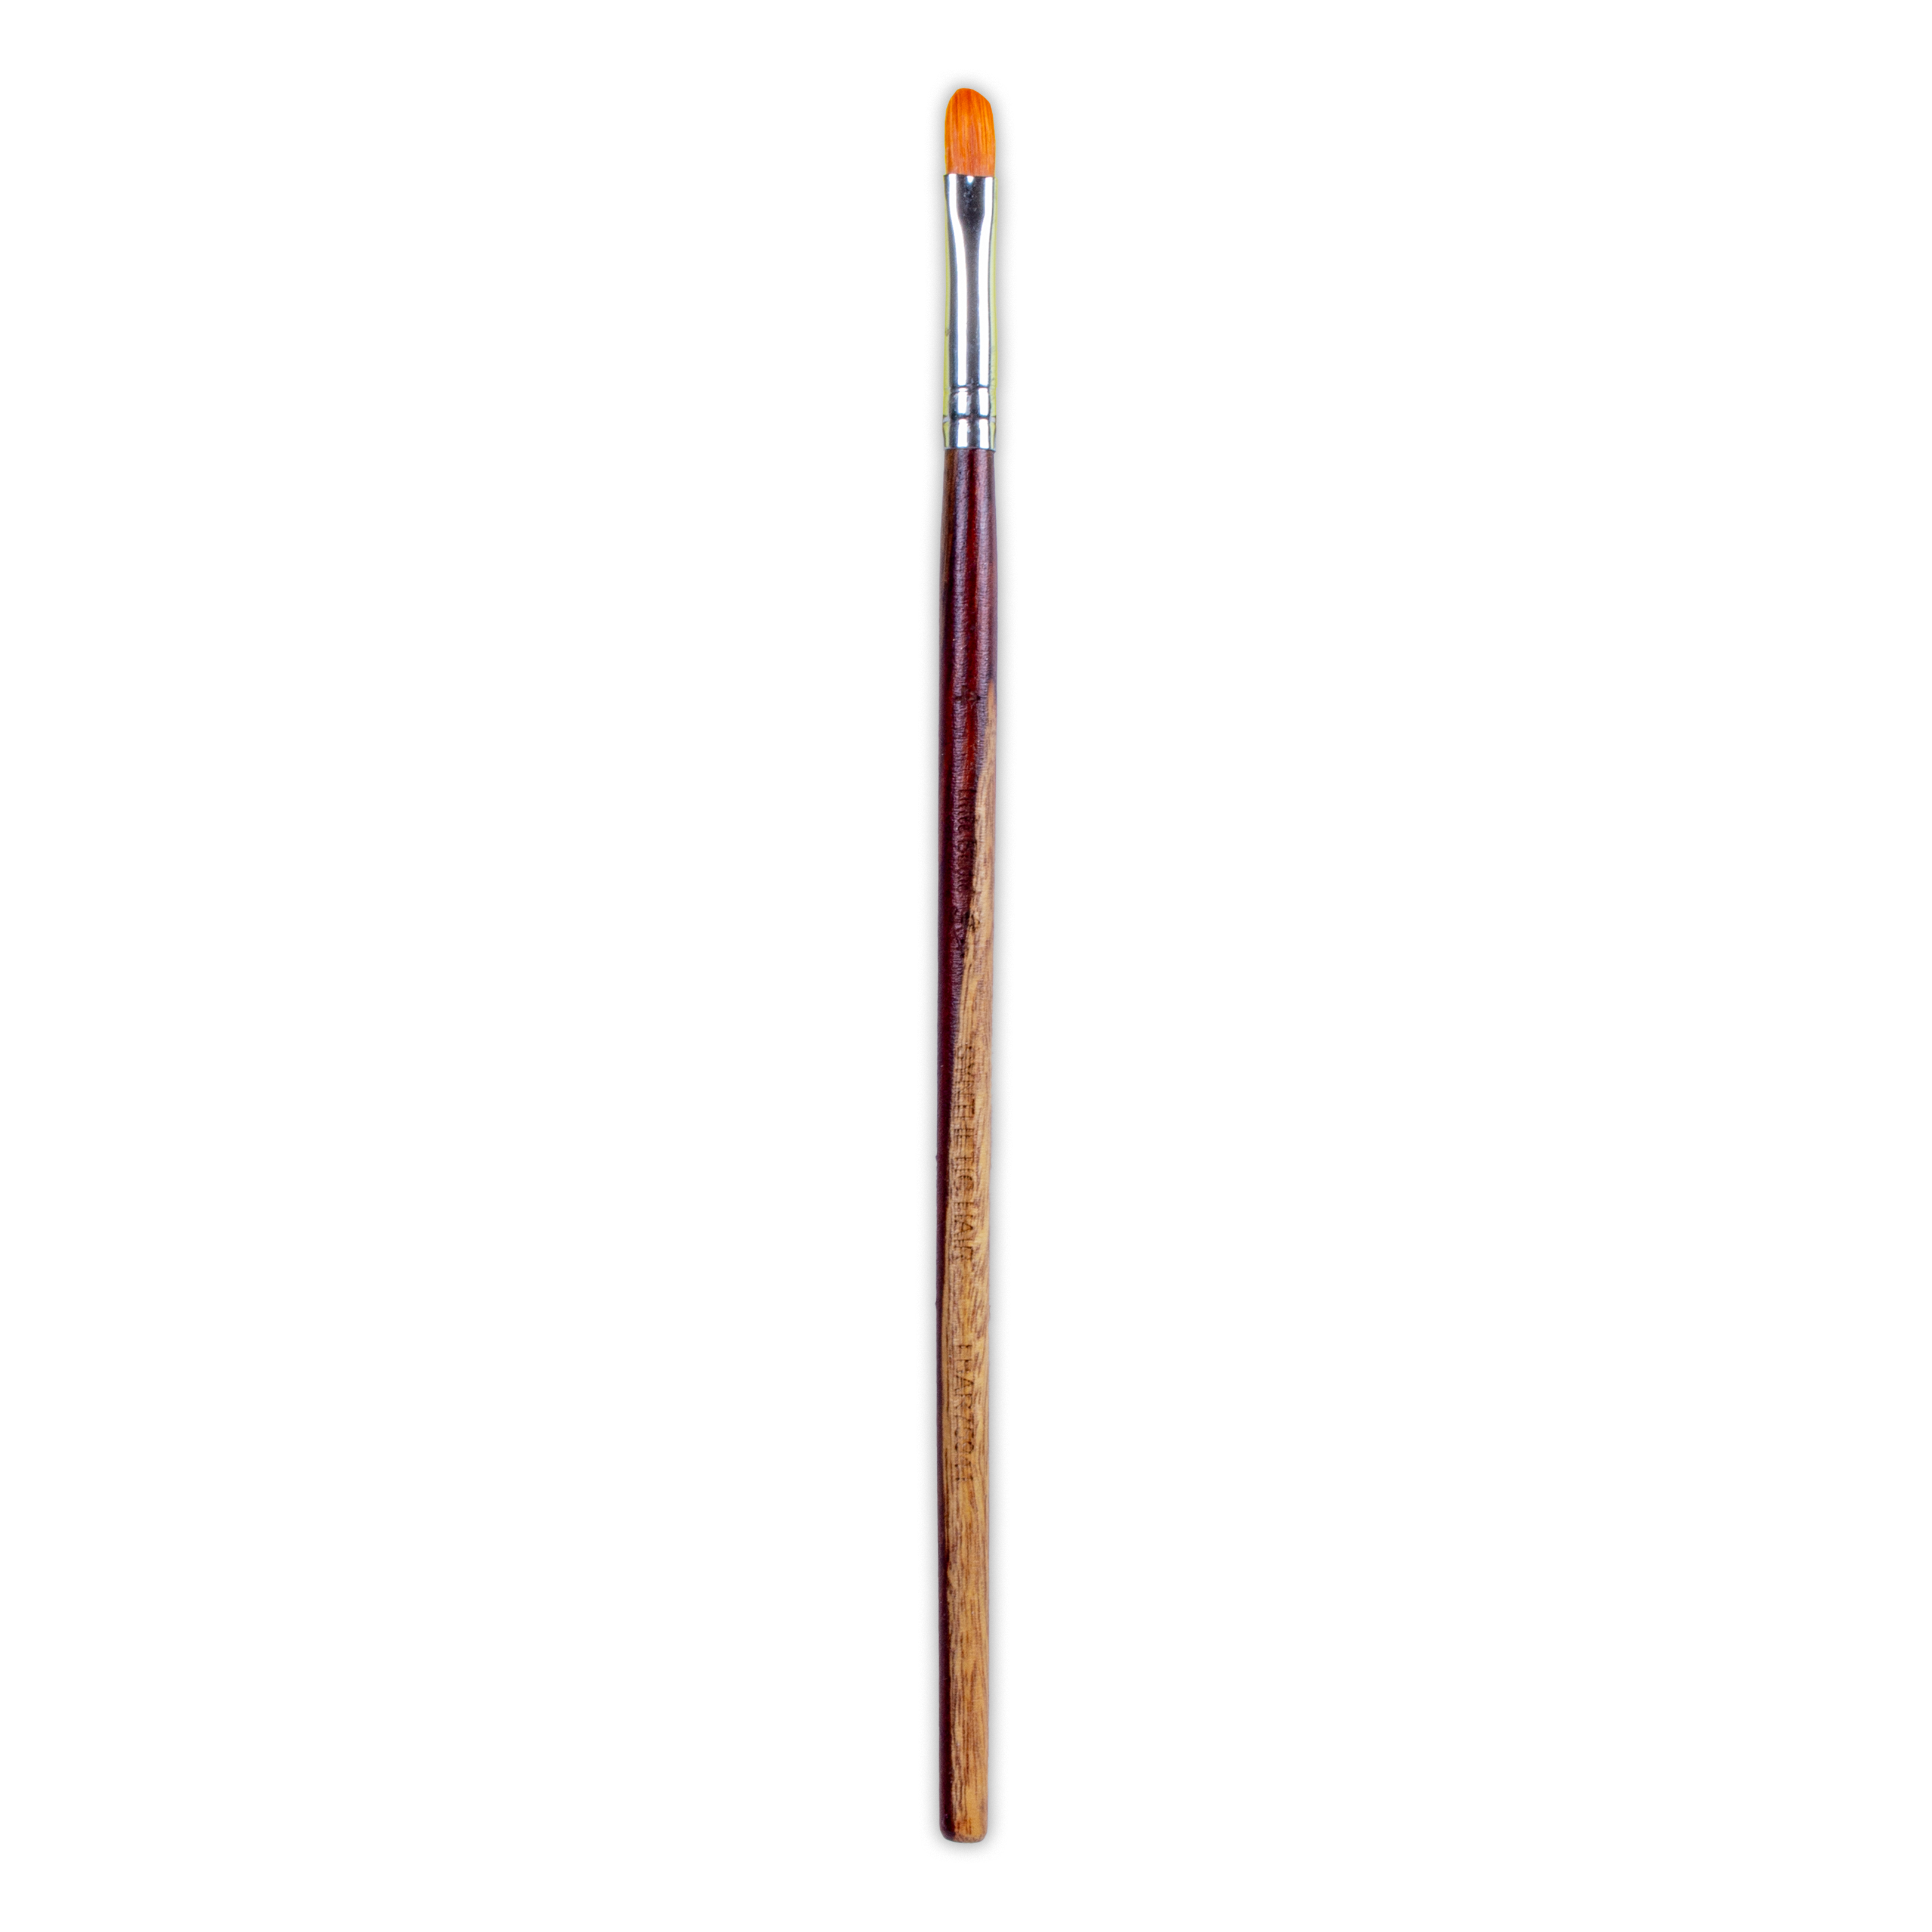 Rosewood Filbert Brush Synthetic Hair Handle Length 200mm Size 4 1 pc